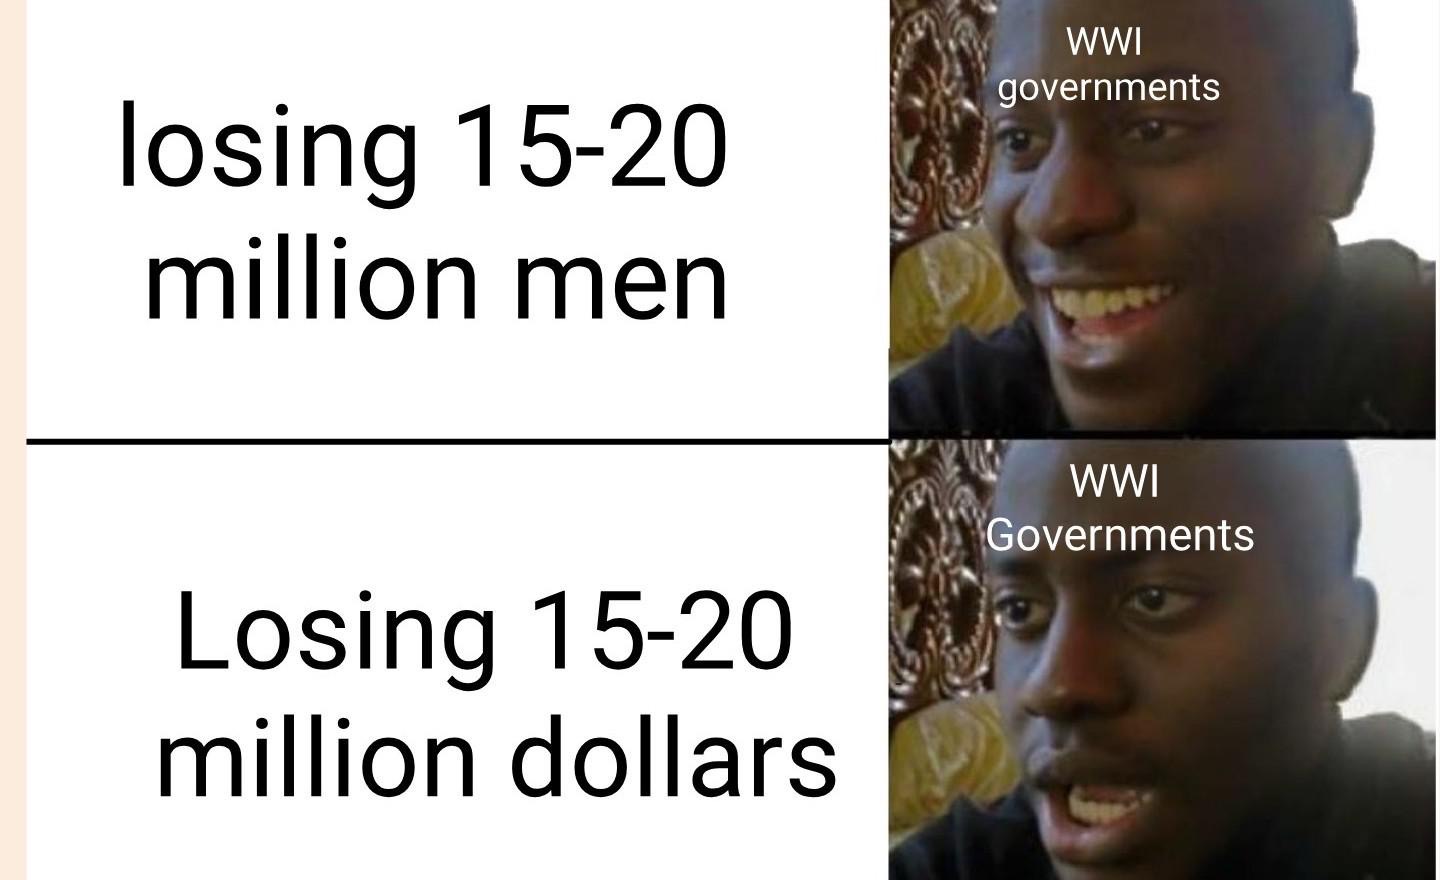 minecraft memes - Wwi governments losing 1520 million men Wwi Governments Losing 1520 million dollars